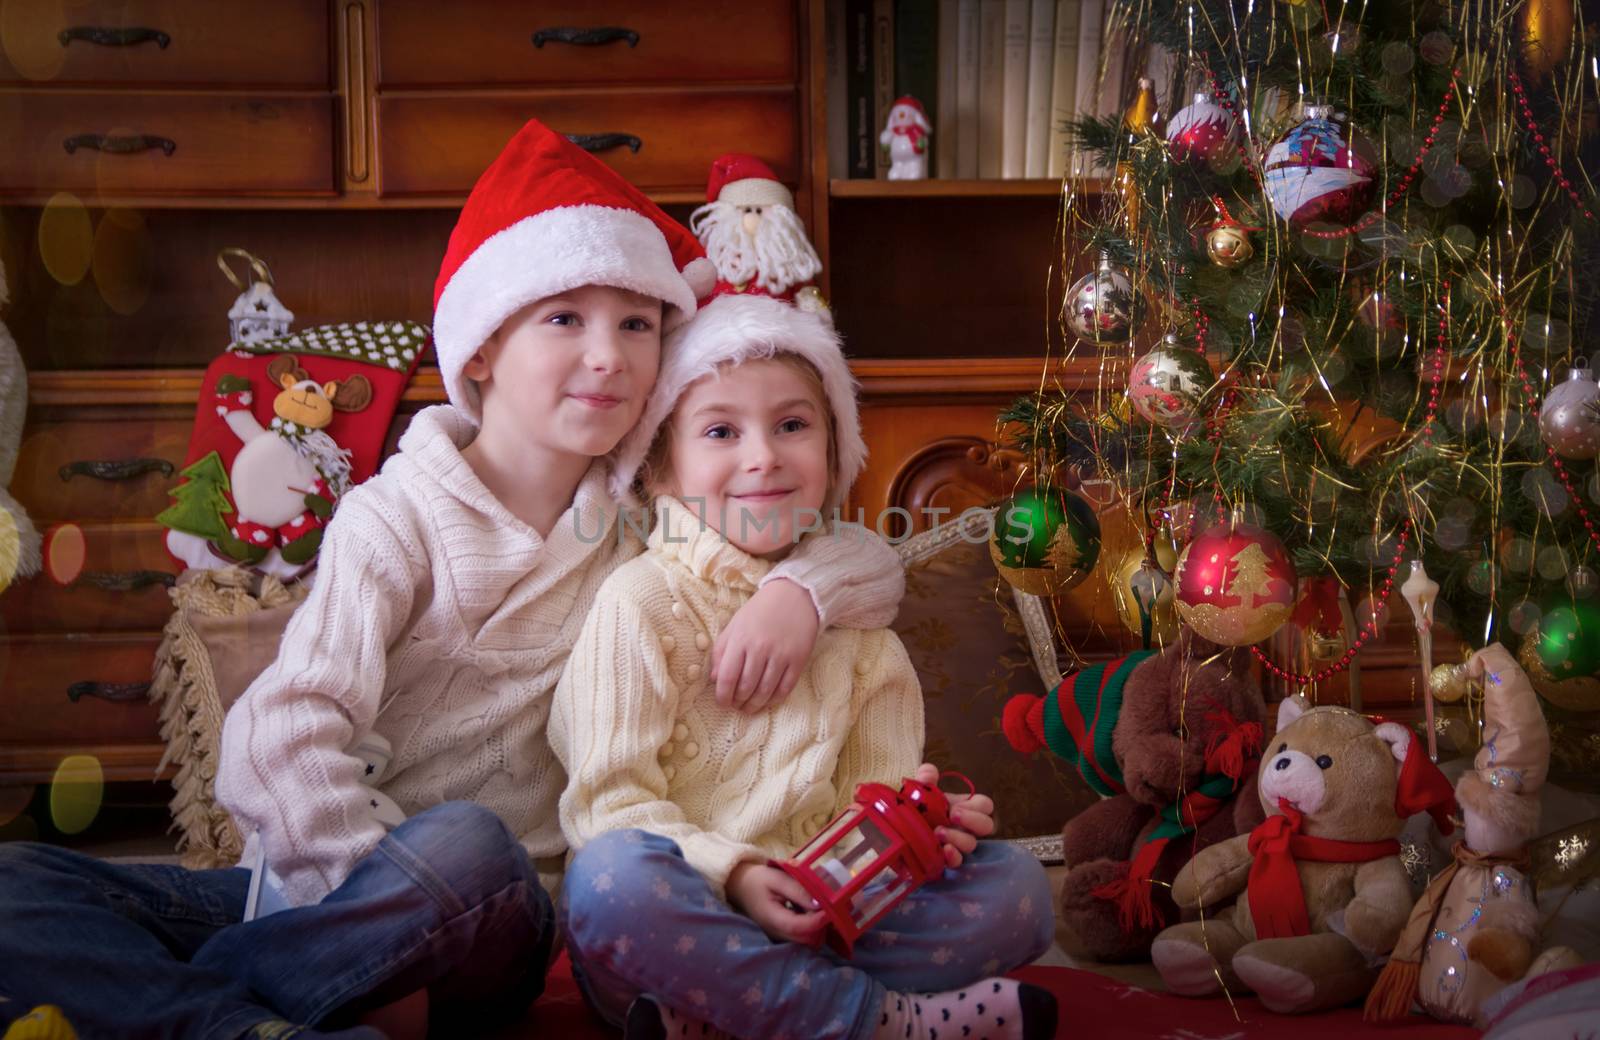 Sister and brother sittting under Christmas tree by Angel_a